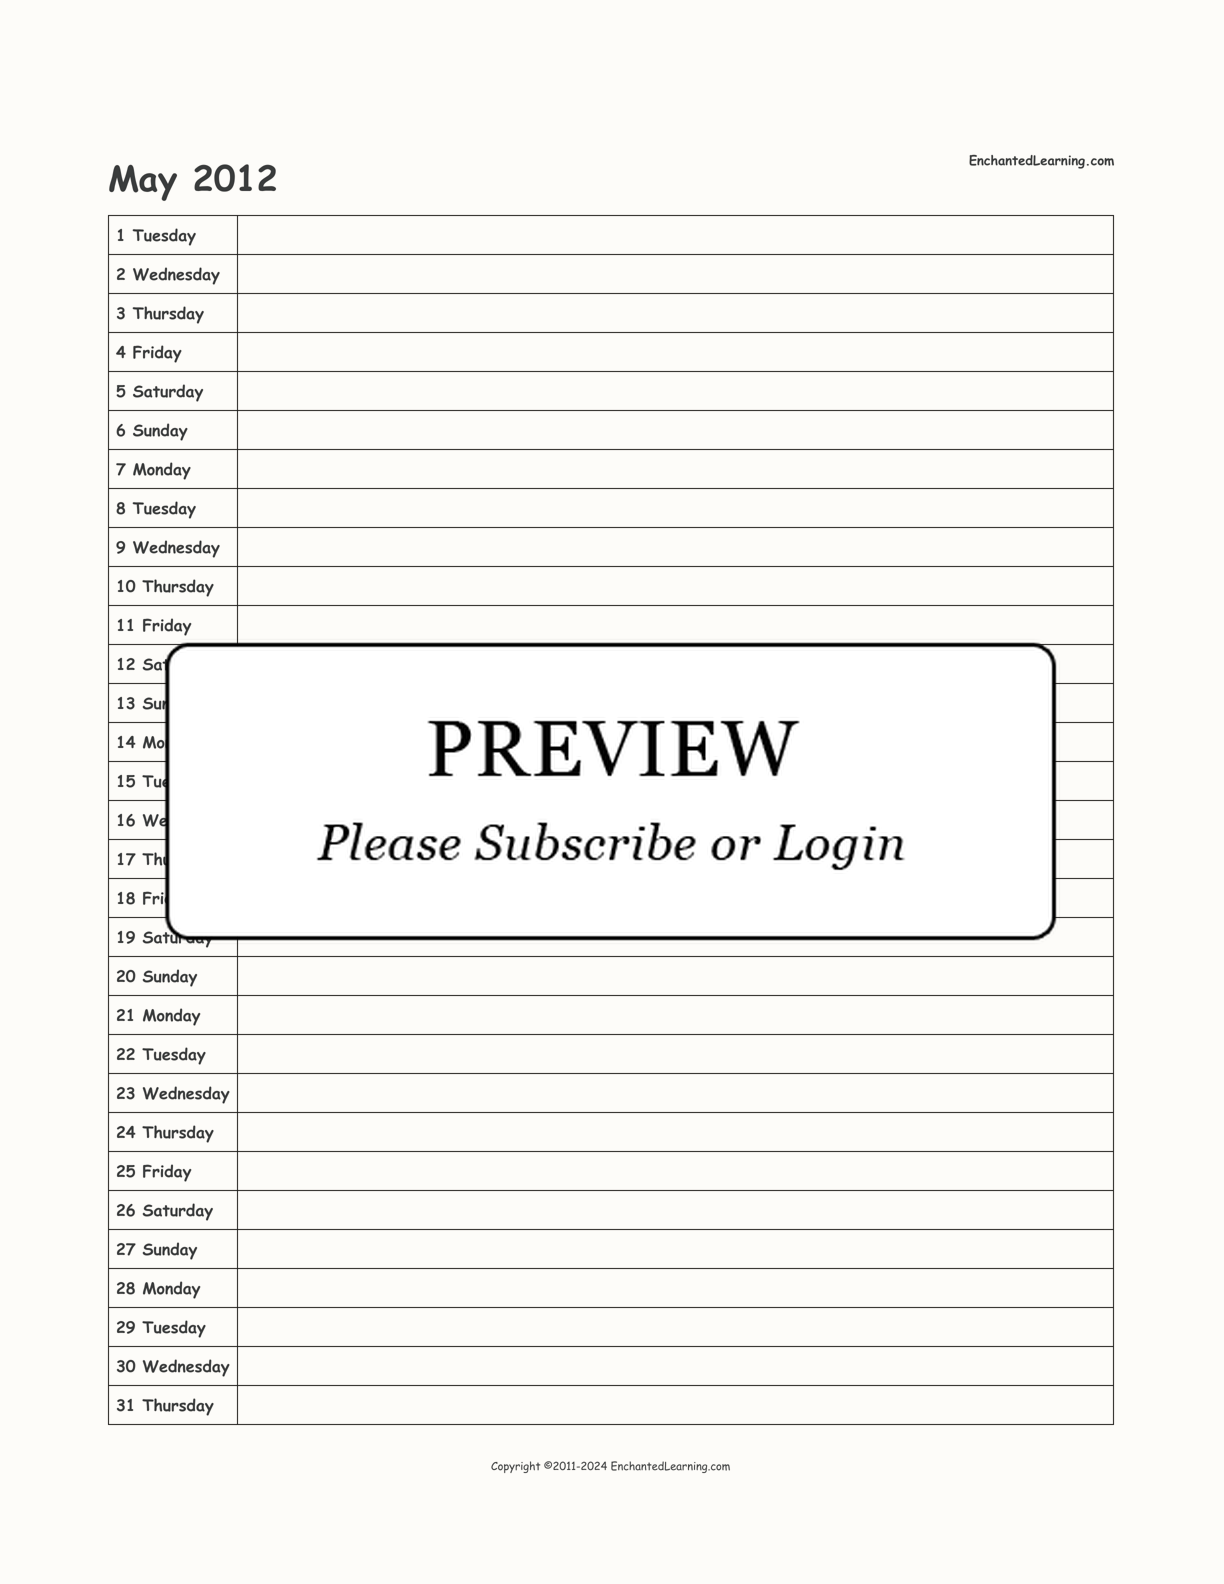 2012 Scheduling Calendar interactive printout page 5